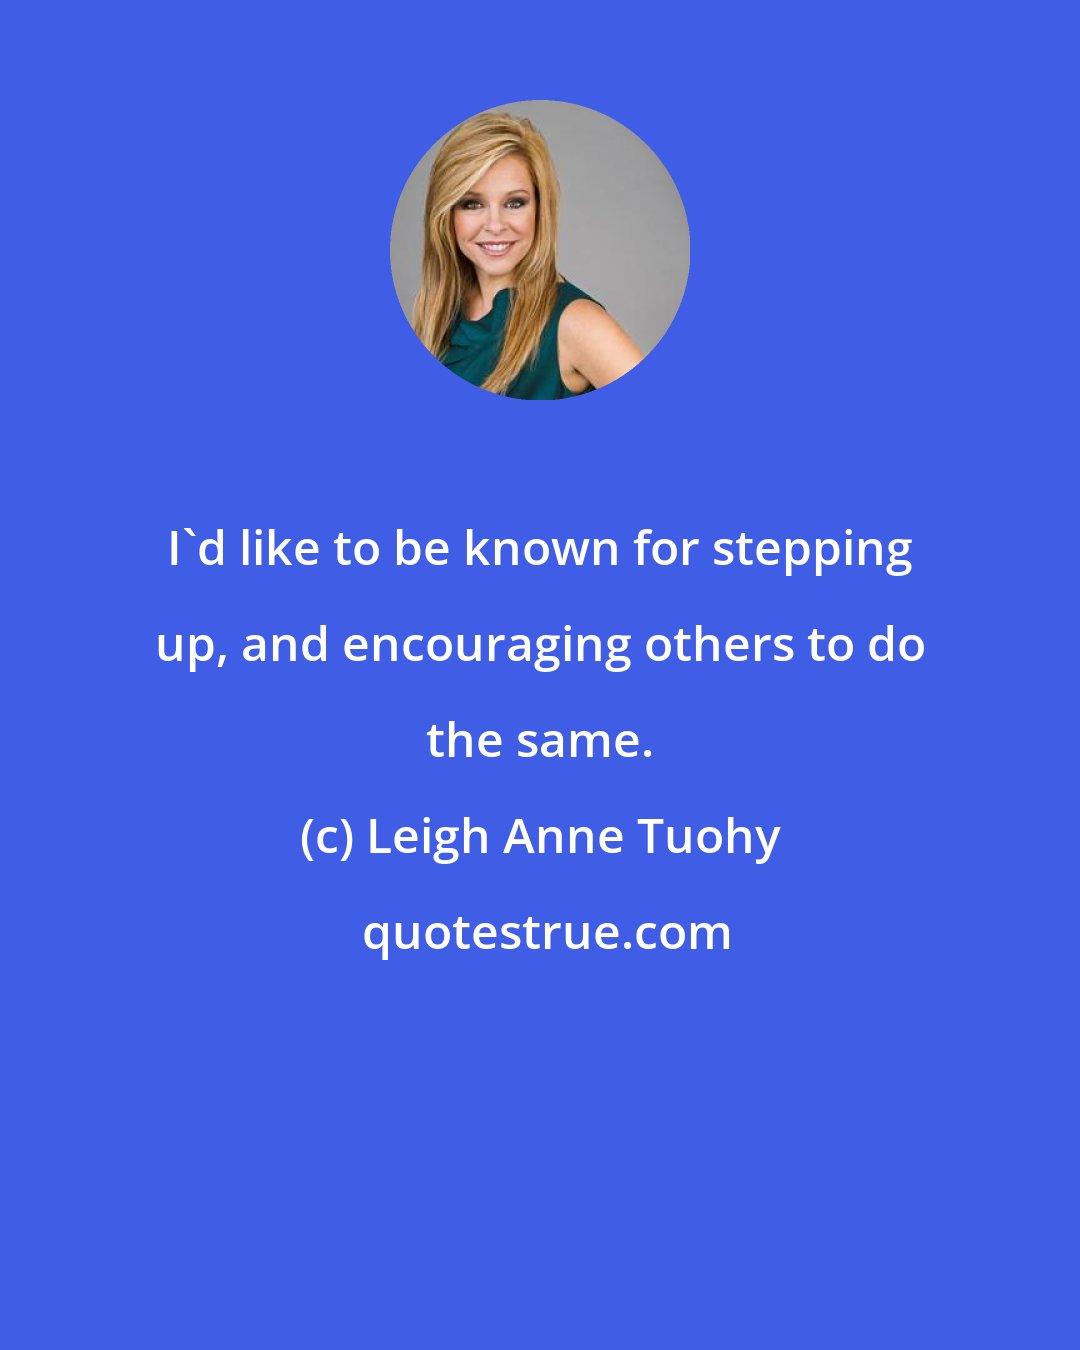 Leigh Anne Tuohy: I'd like to be known for stepping up, and encouraging others to do the same.